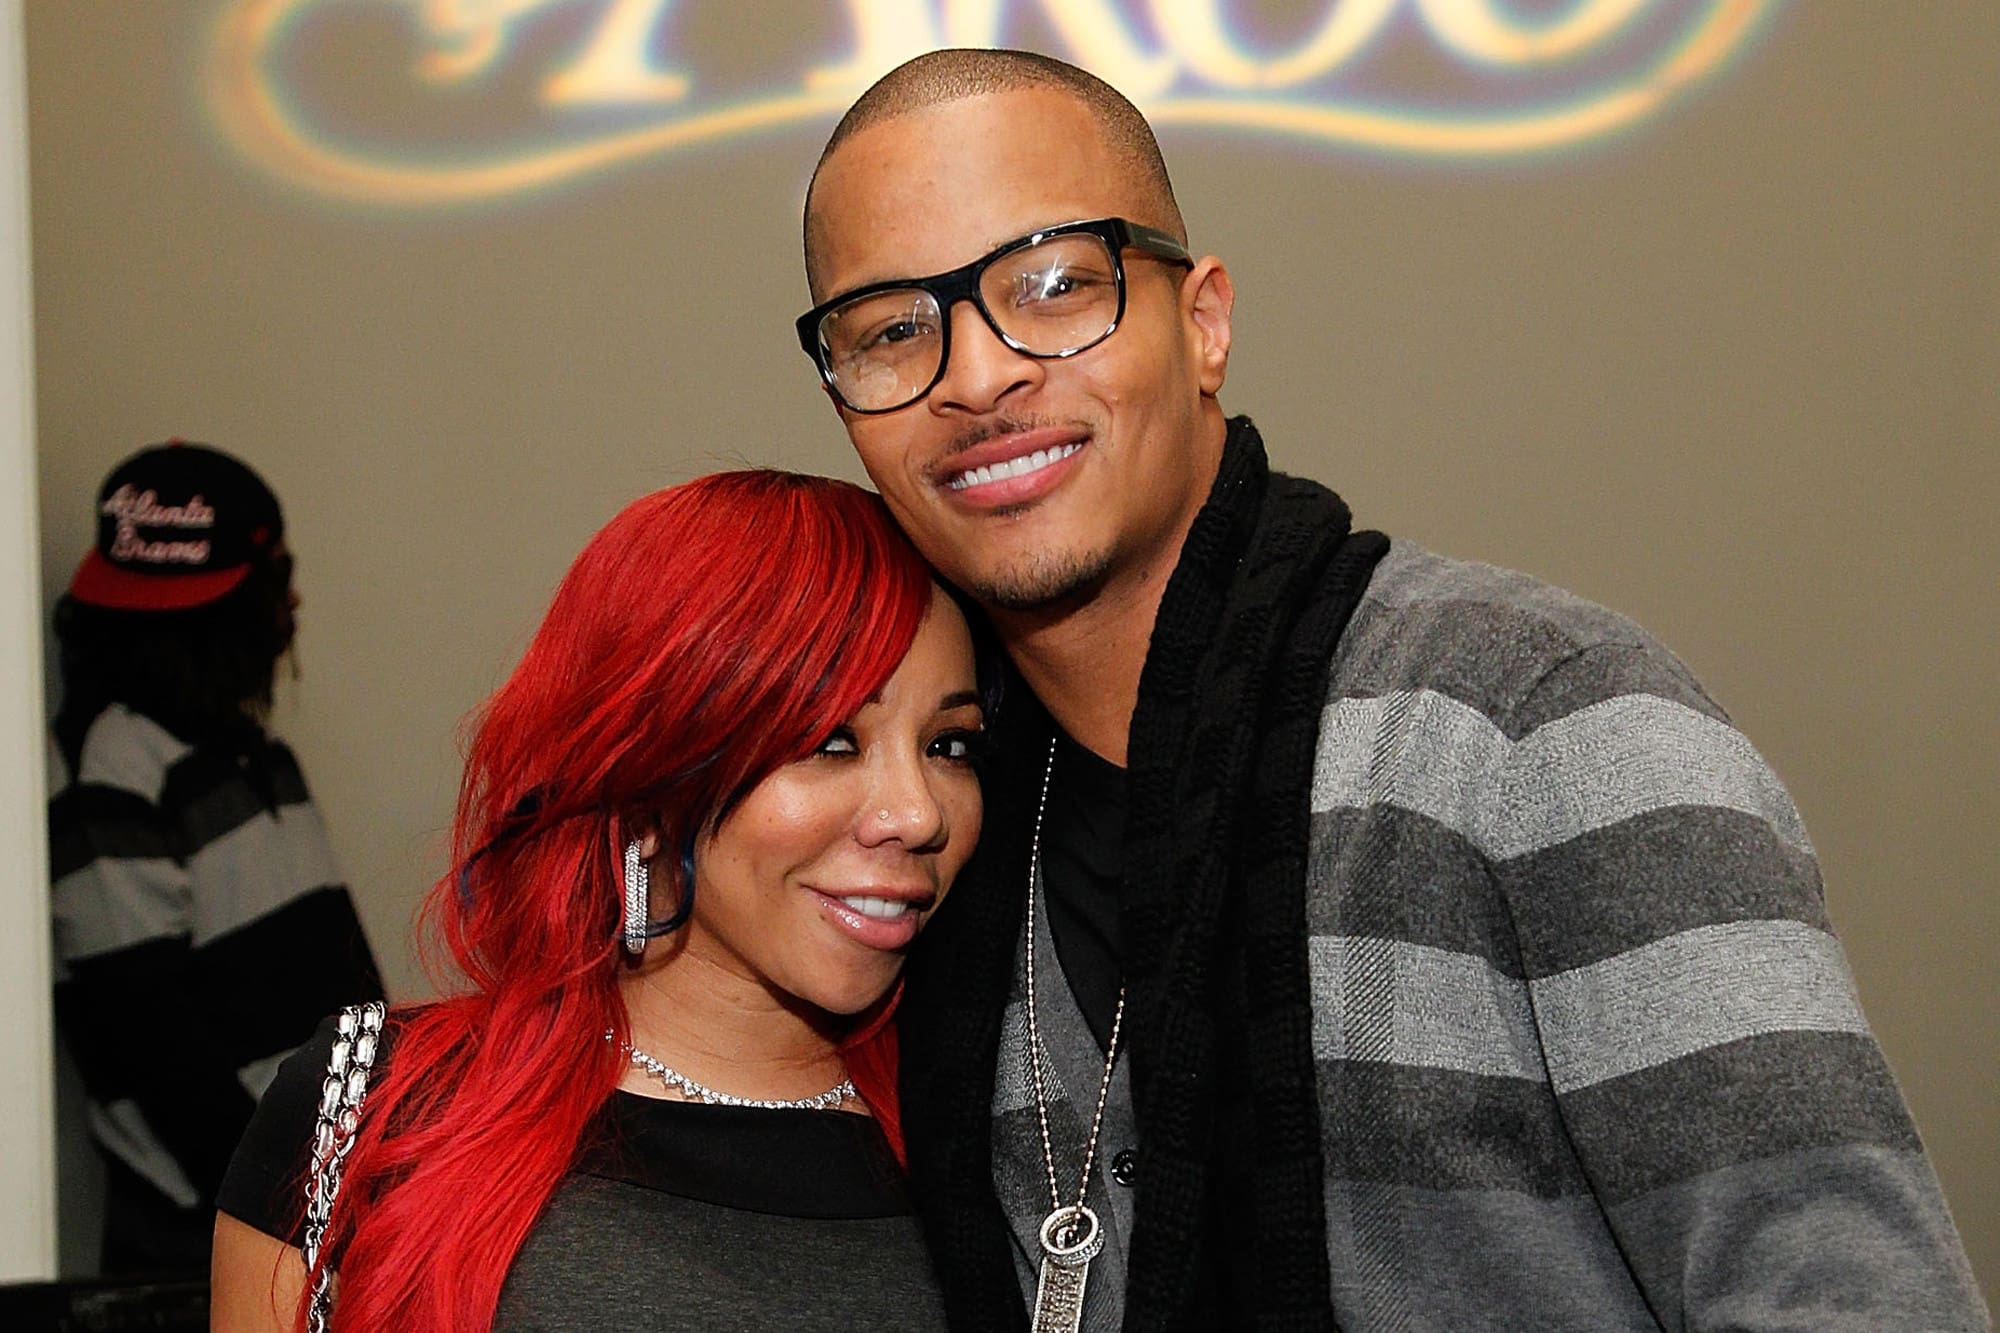 T.I. Is The Master Of Magenta Together With Gorgeous Tiny Harris - See Their Latest Pics Together